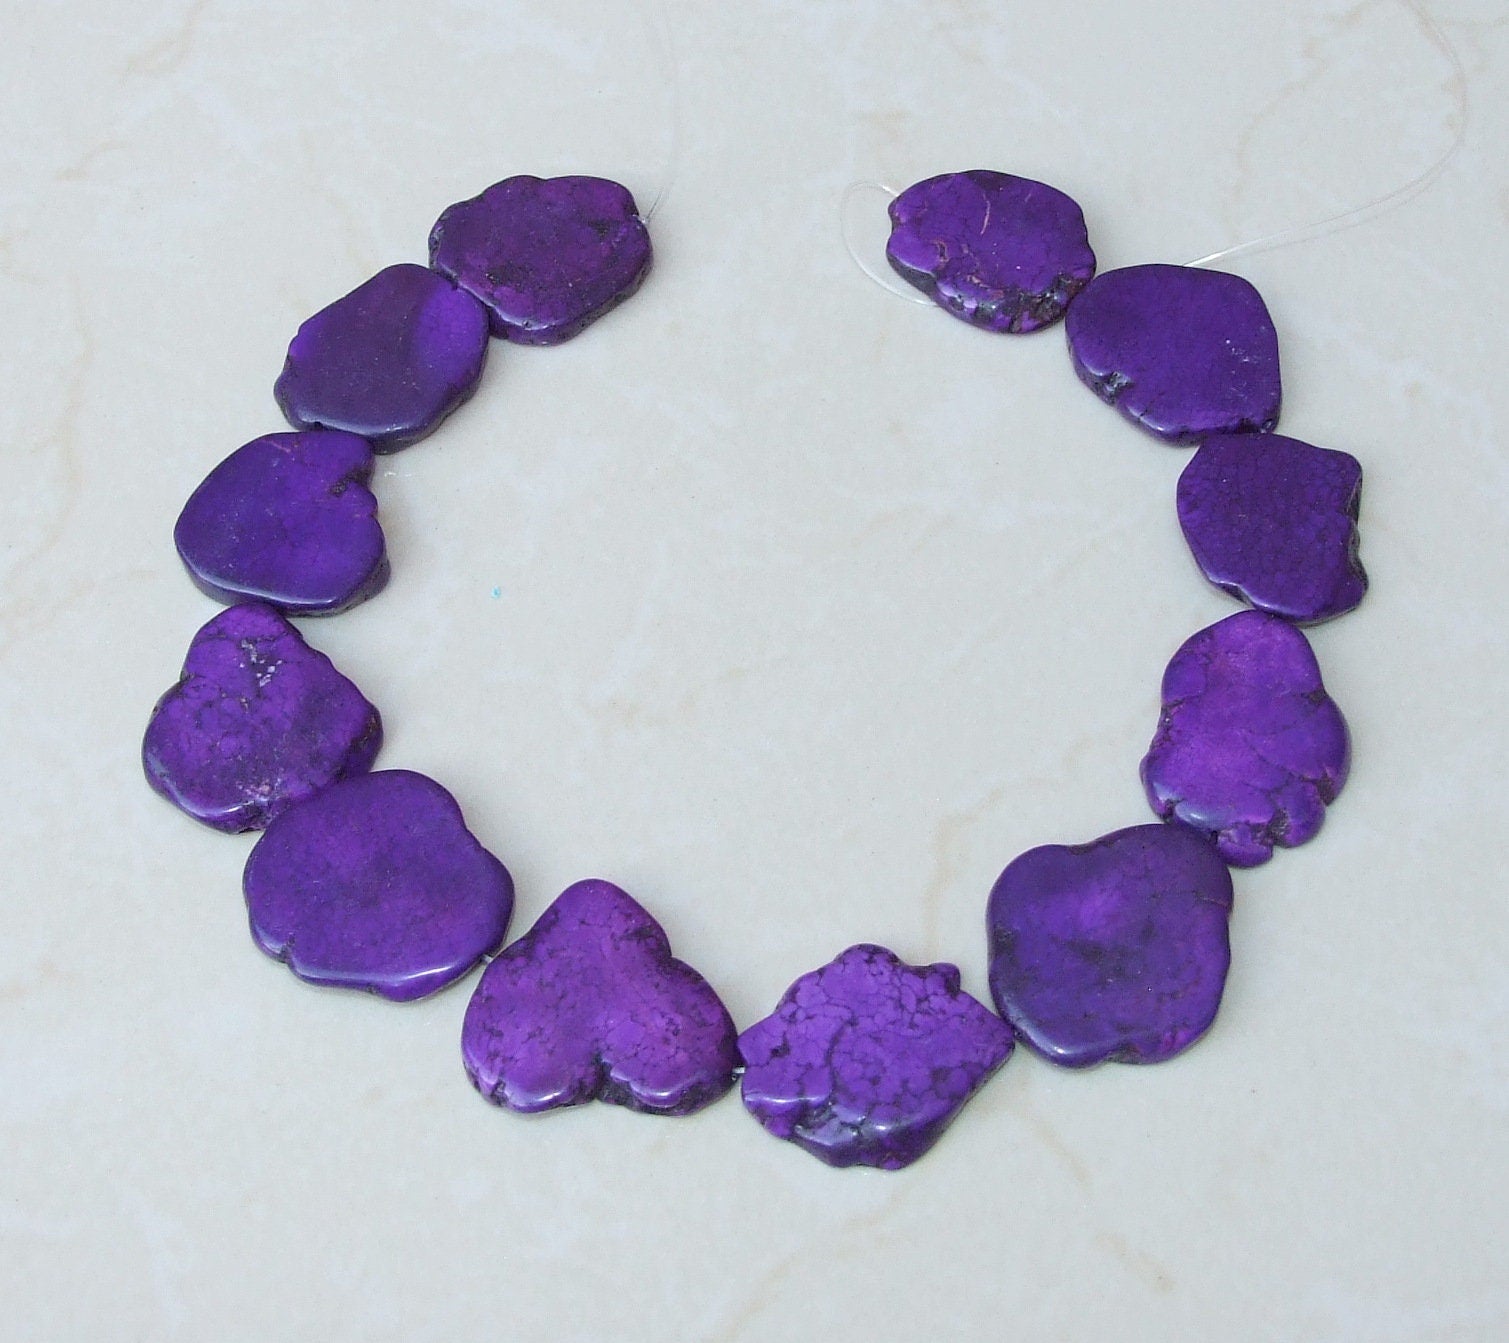 Small Purple Magnesite Beads, Magnesite Nuggets Beads Slabs, Howlite Beads, Gemstones, Howlite Necklace, Loose Stones, Slabs - 25mm to 30mm